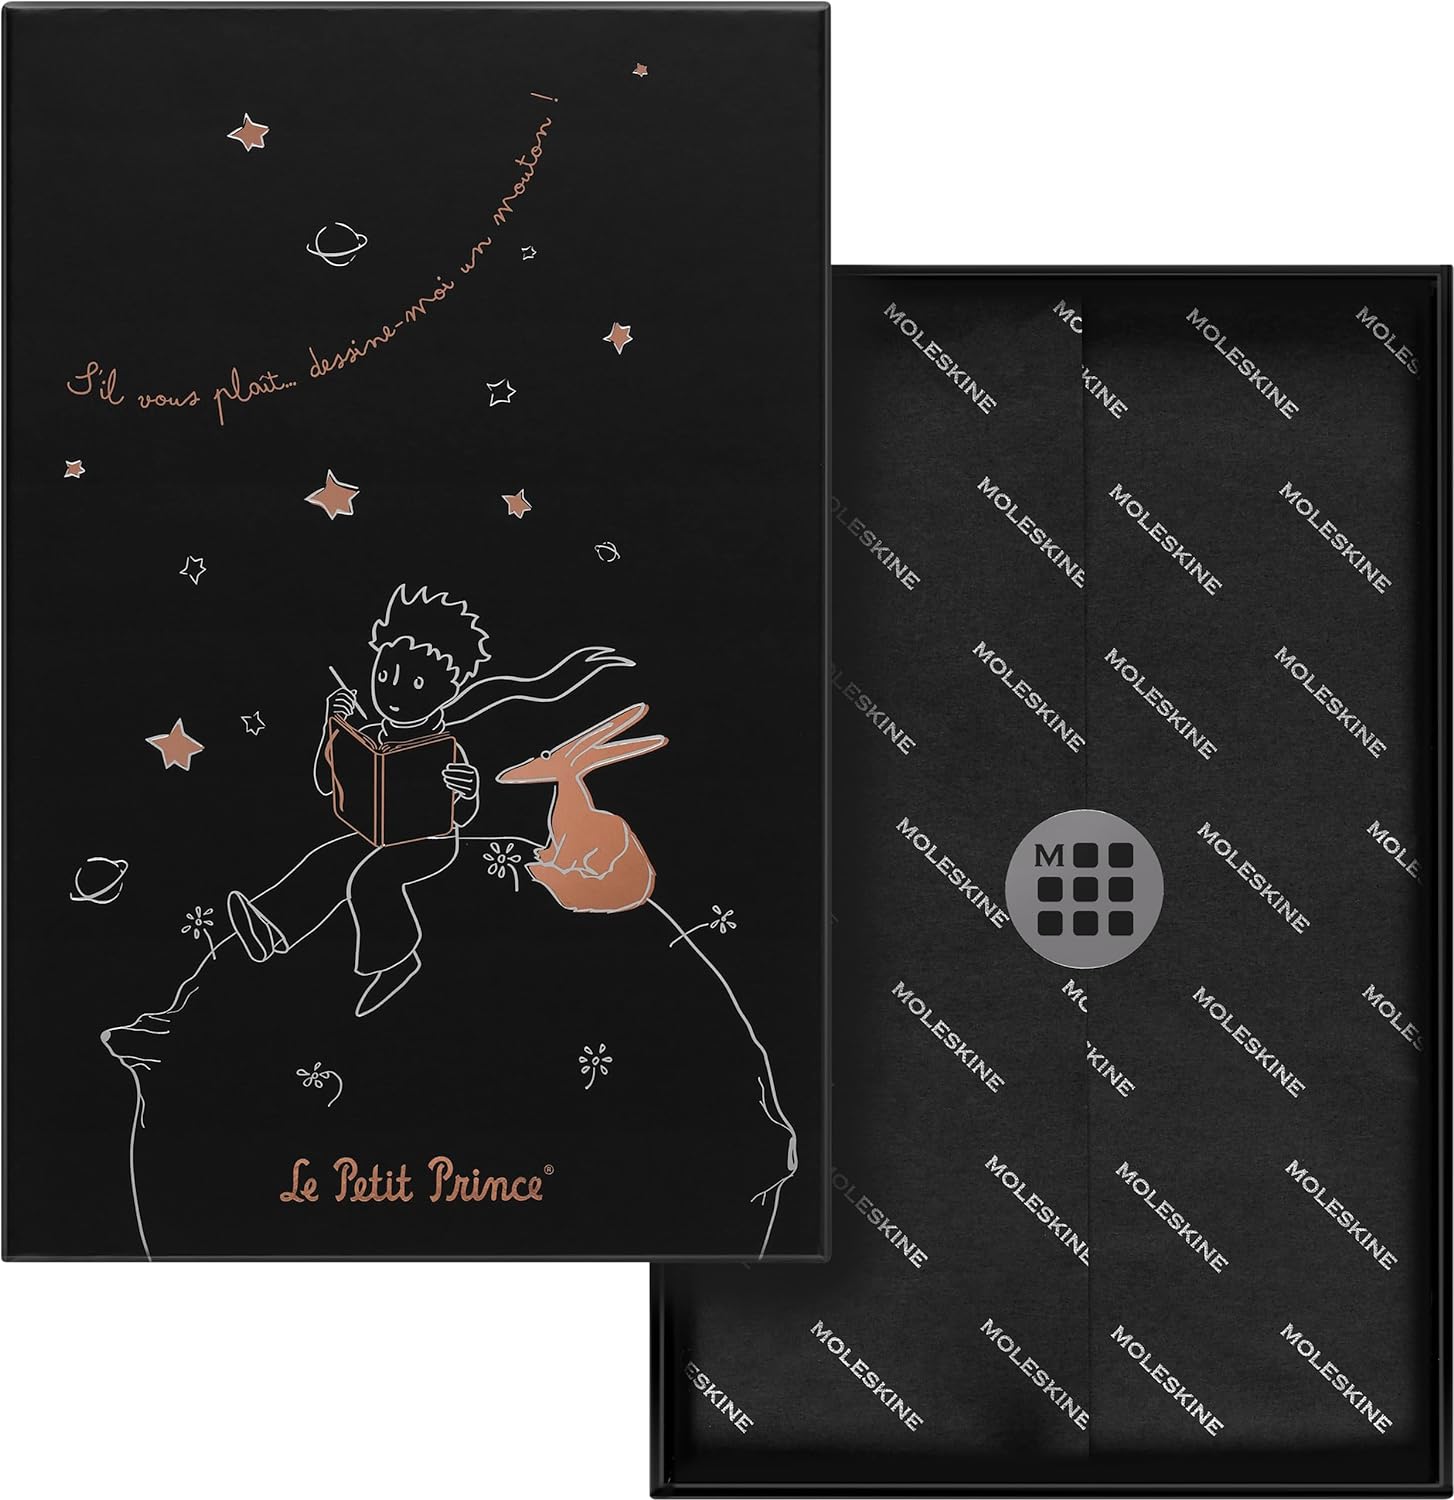 Carnet - Le Petit Prince with Gift Box - Large, Hard Cover, Ruled - Limited Edition | Moleskine